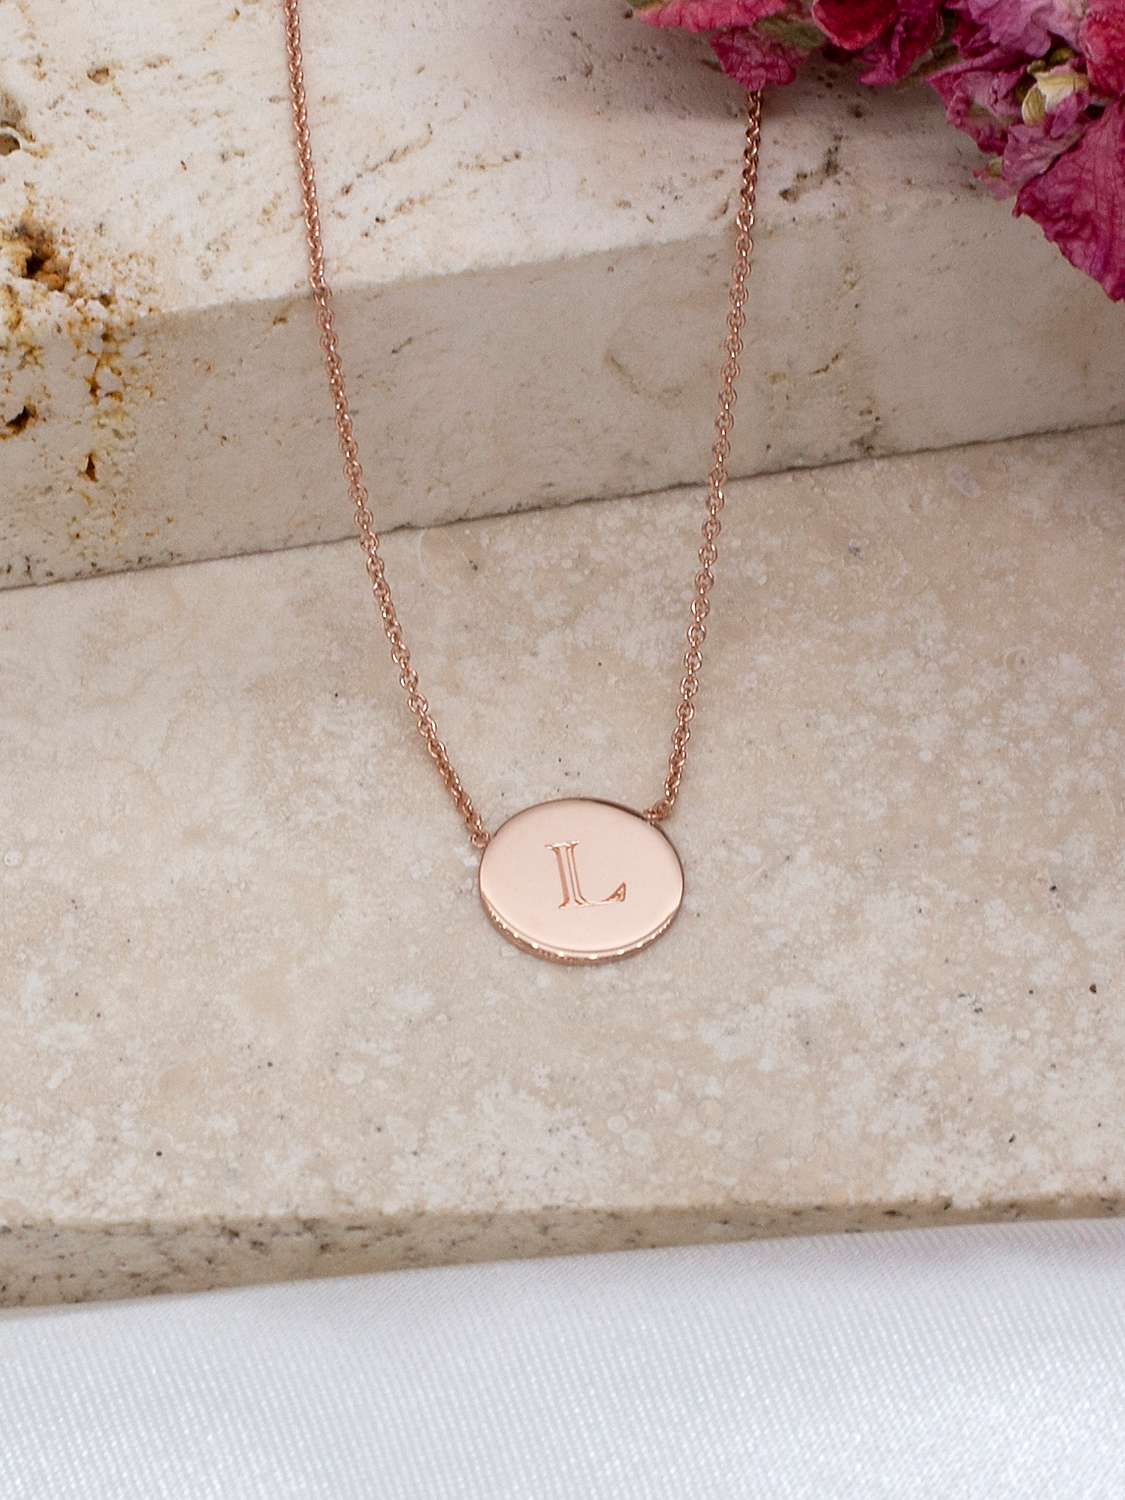 Buy IBB Personalised 9ct Rose Gold Single Disc Pendant Necklace Online at johnlewis.com